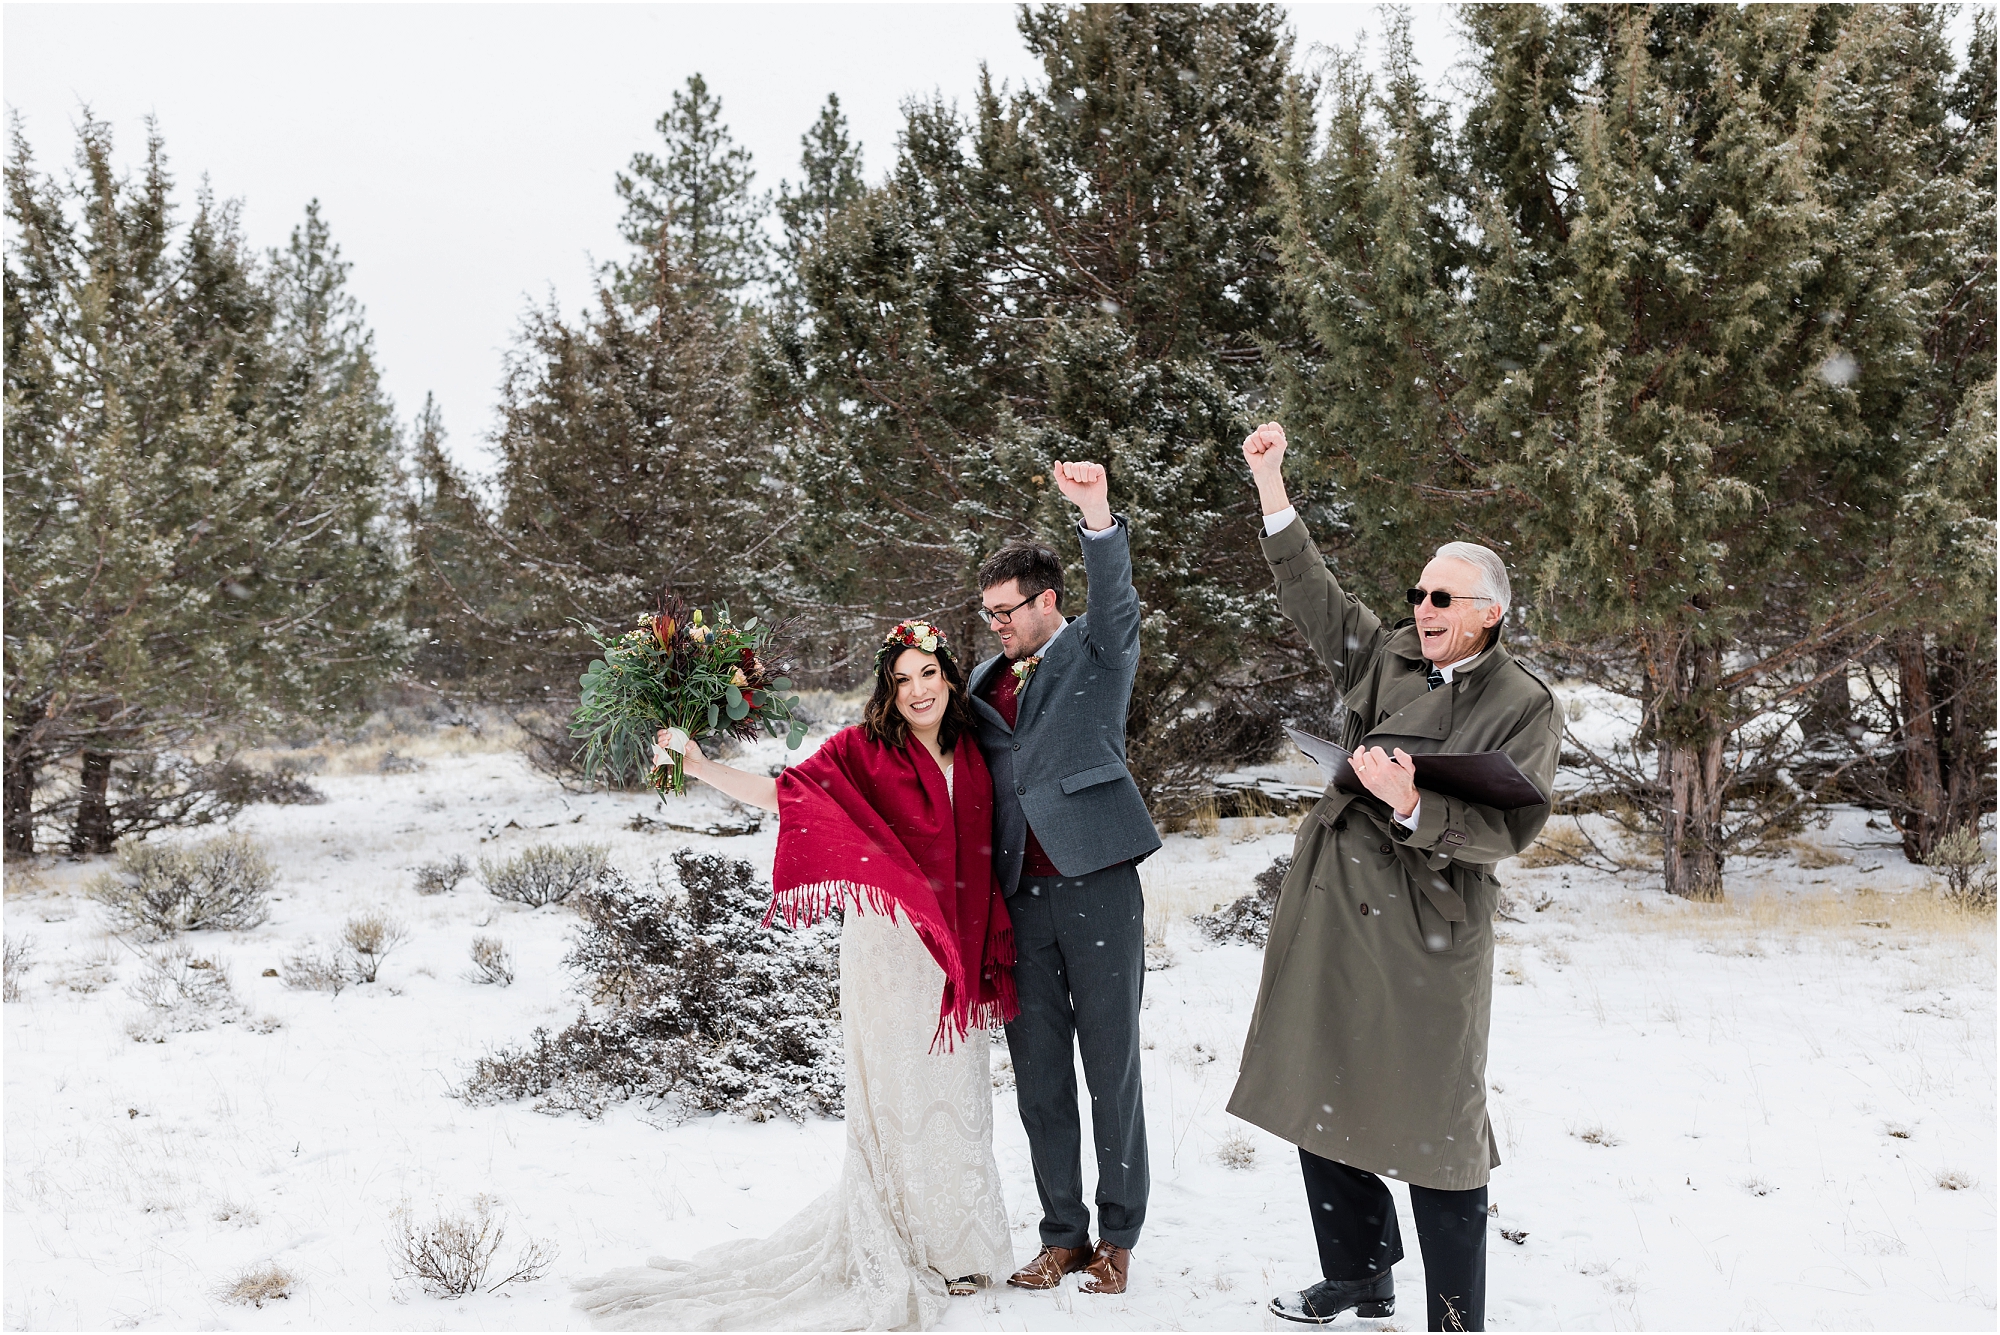 A celebratory fist pump from the groom and officiant at this intimate Central Oregon winter elopement near Five Pine Lodge in Sisters, Oregon. | Erica Swantek Photography